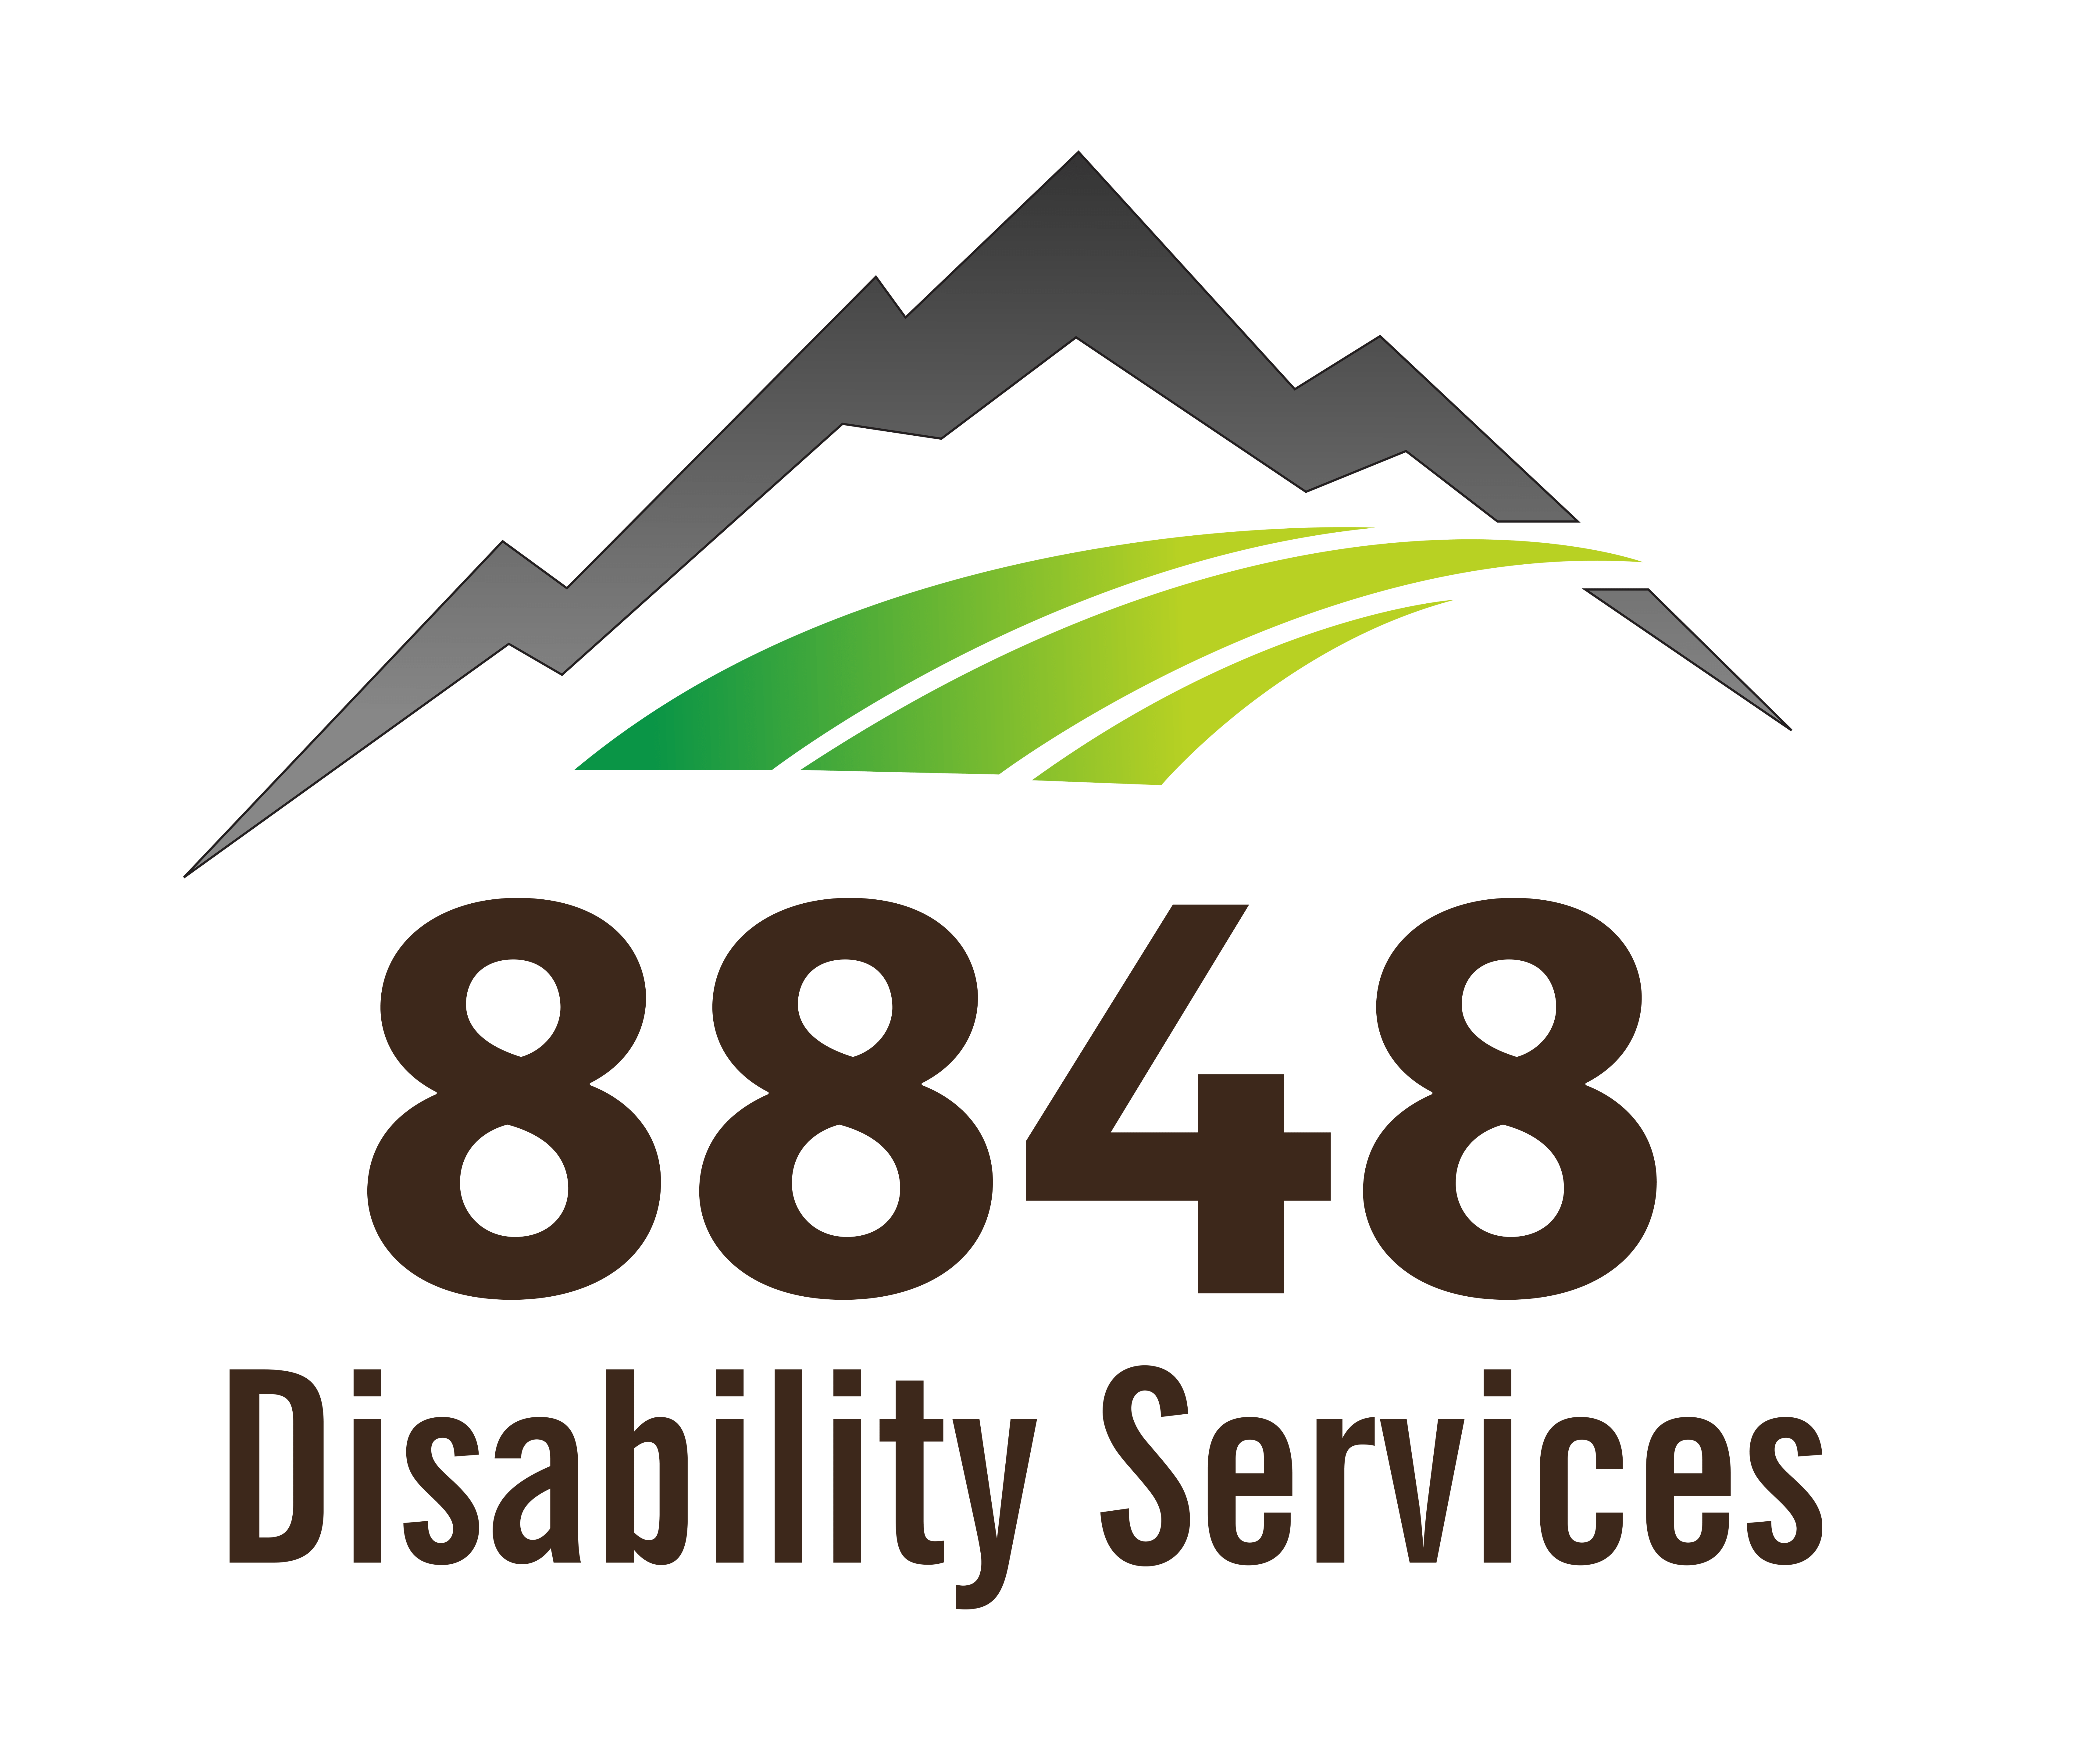 8848 Disability Services